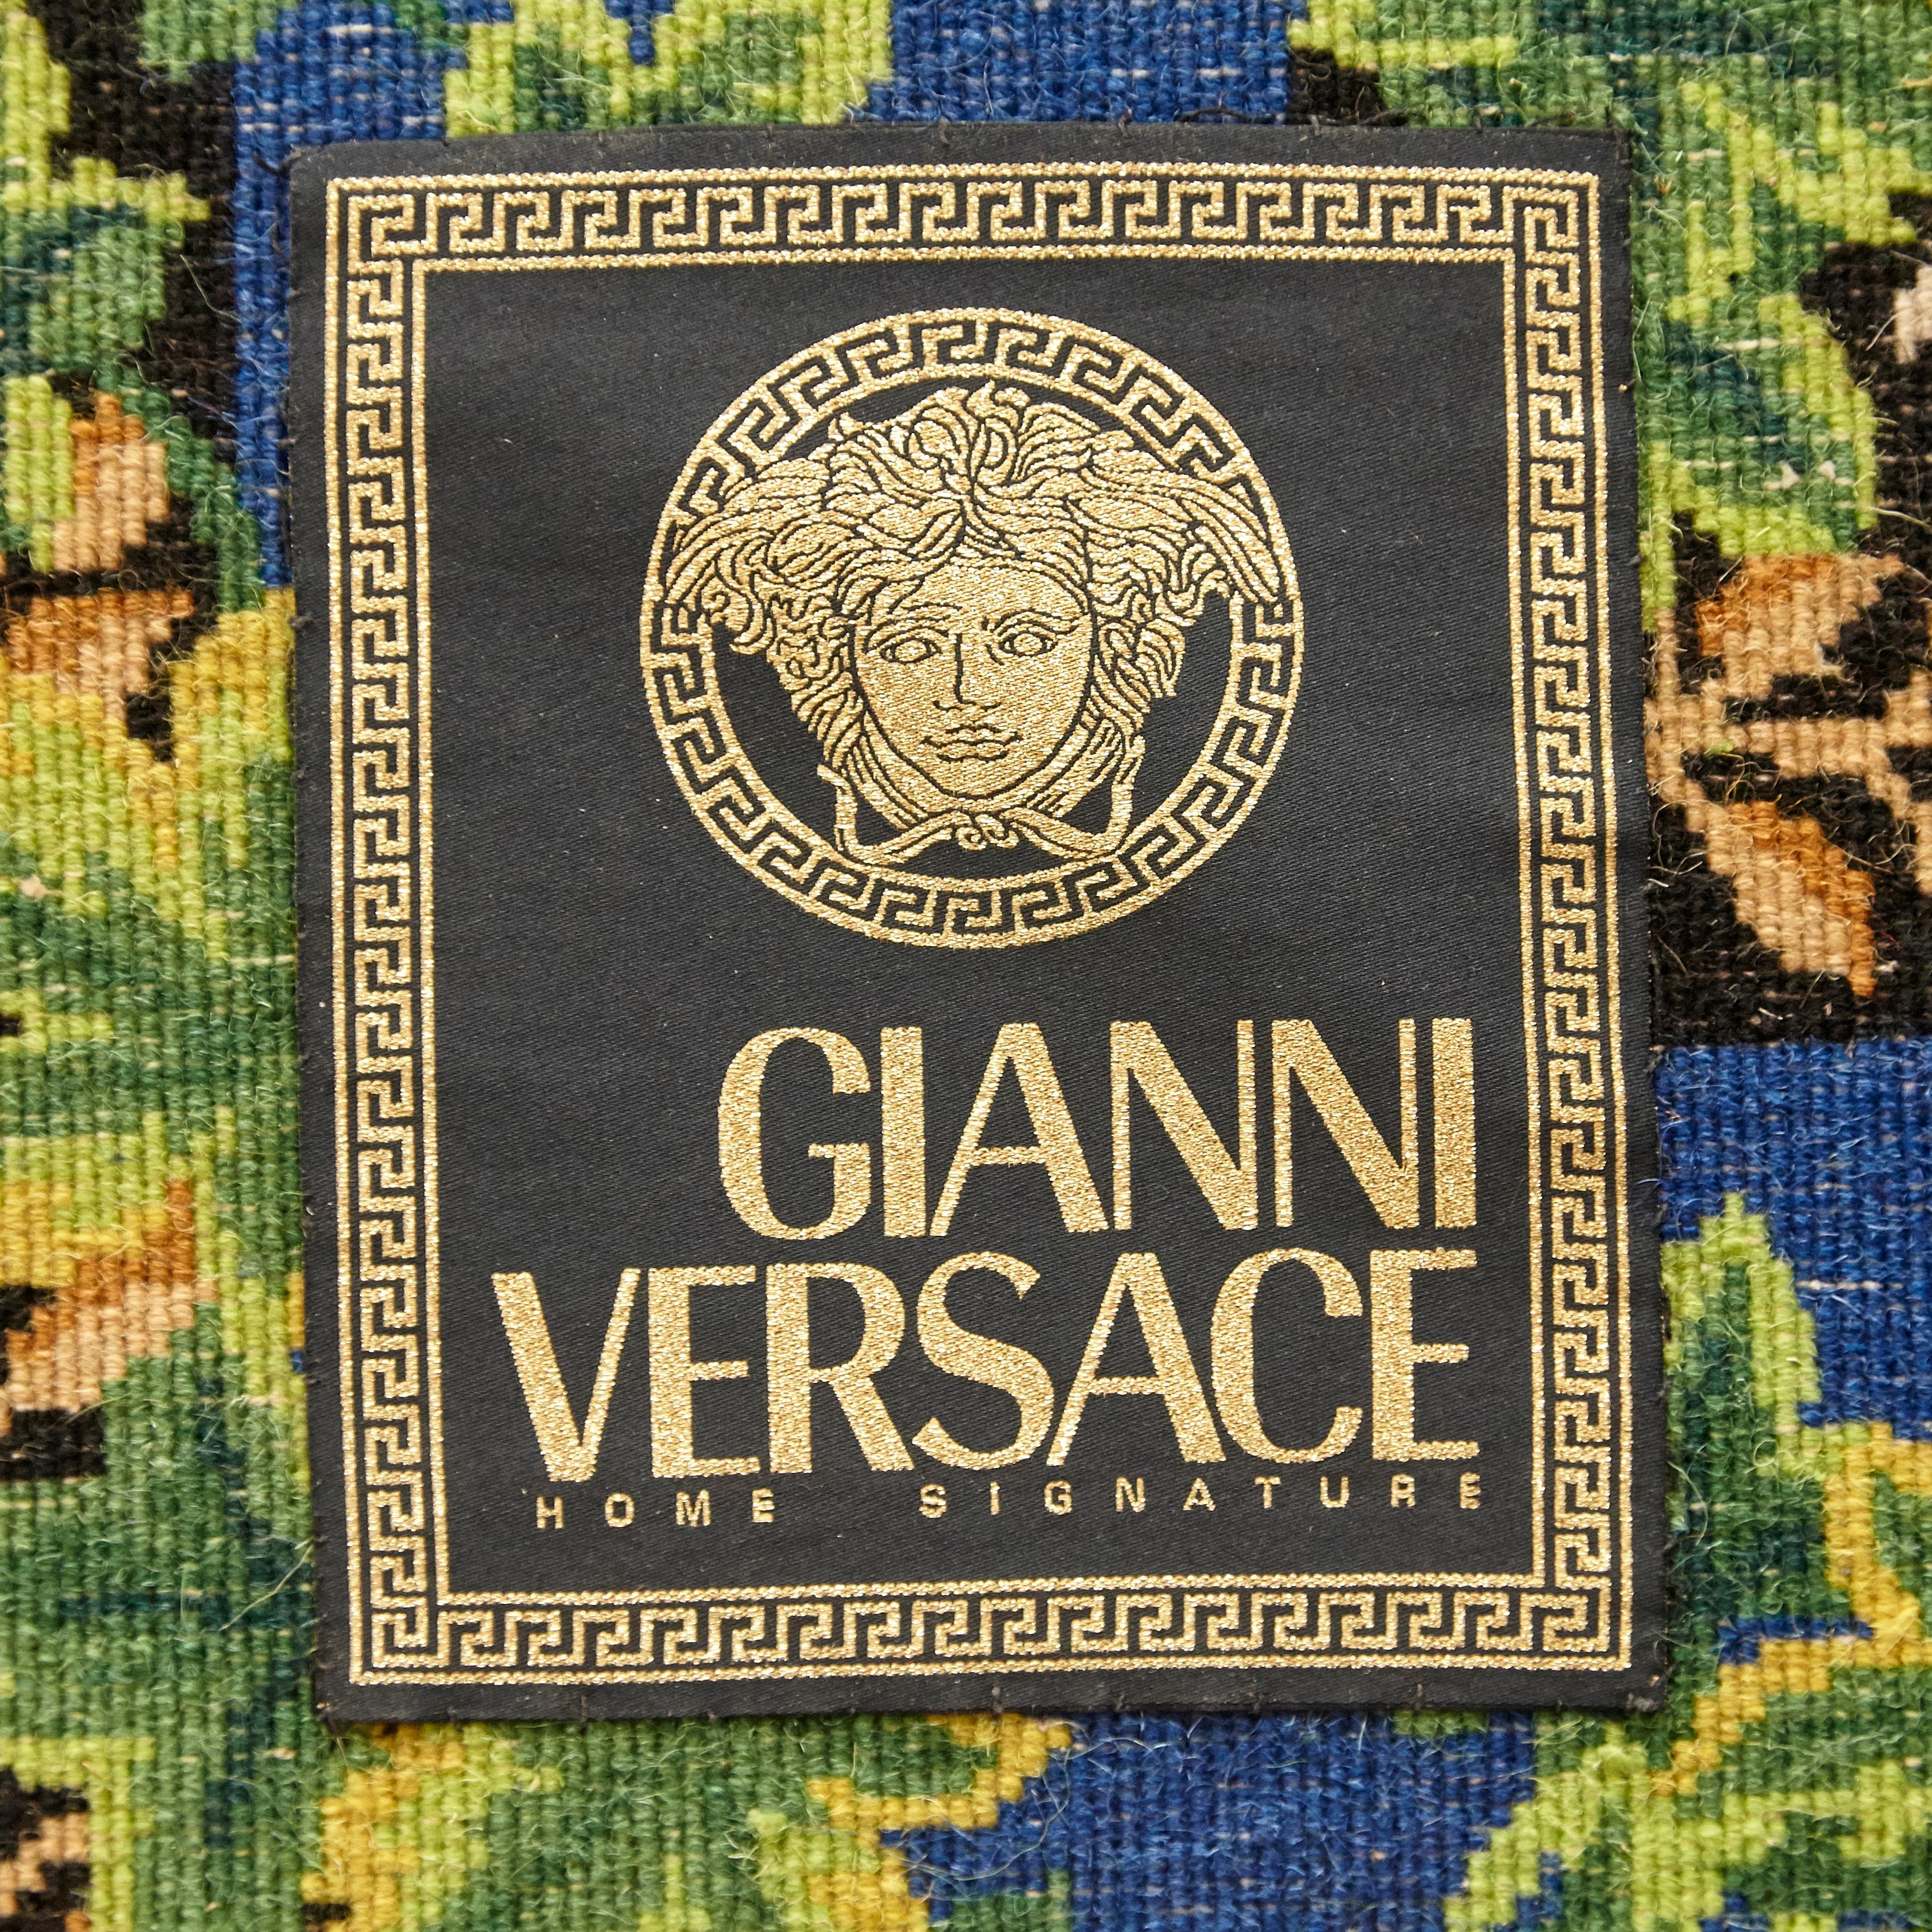 Gianni Versace Collection Rug Wild Ivy, Gold Zebra Animal Print, 1980 For Sale 3